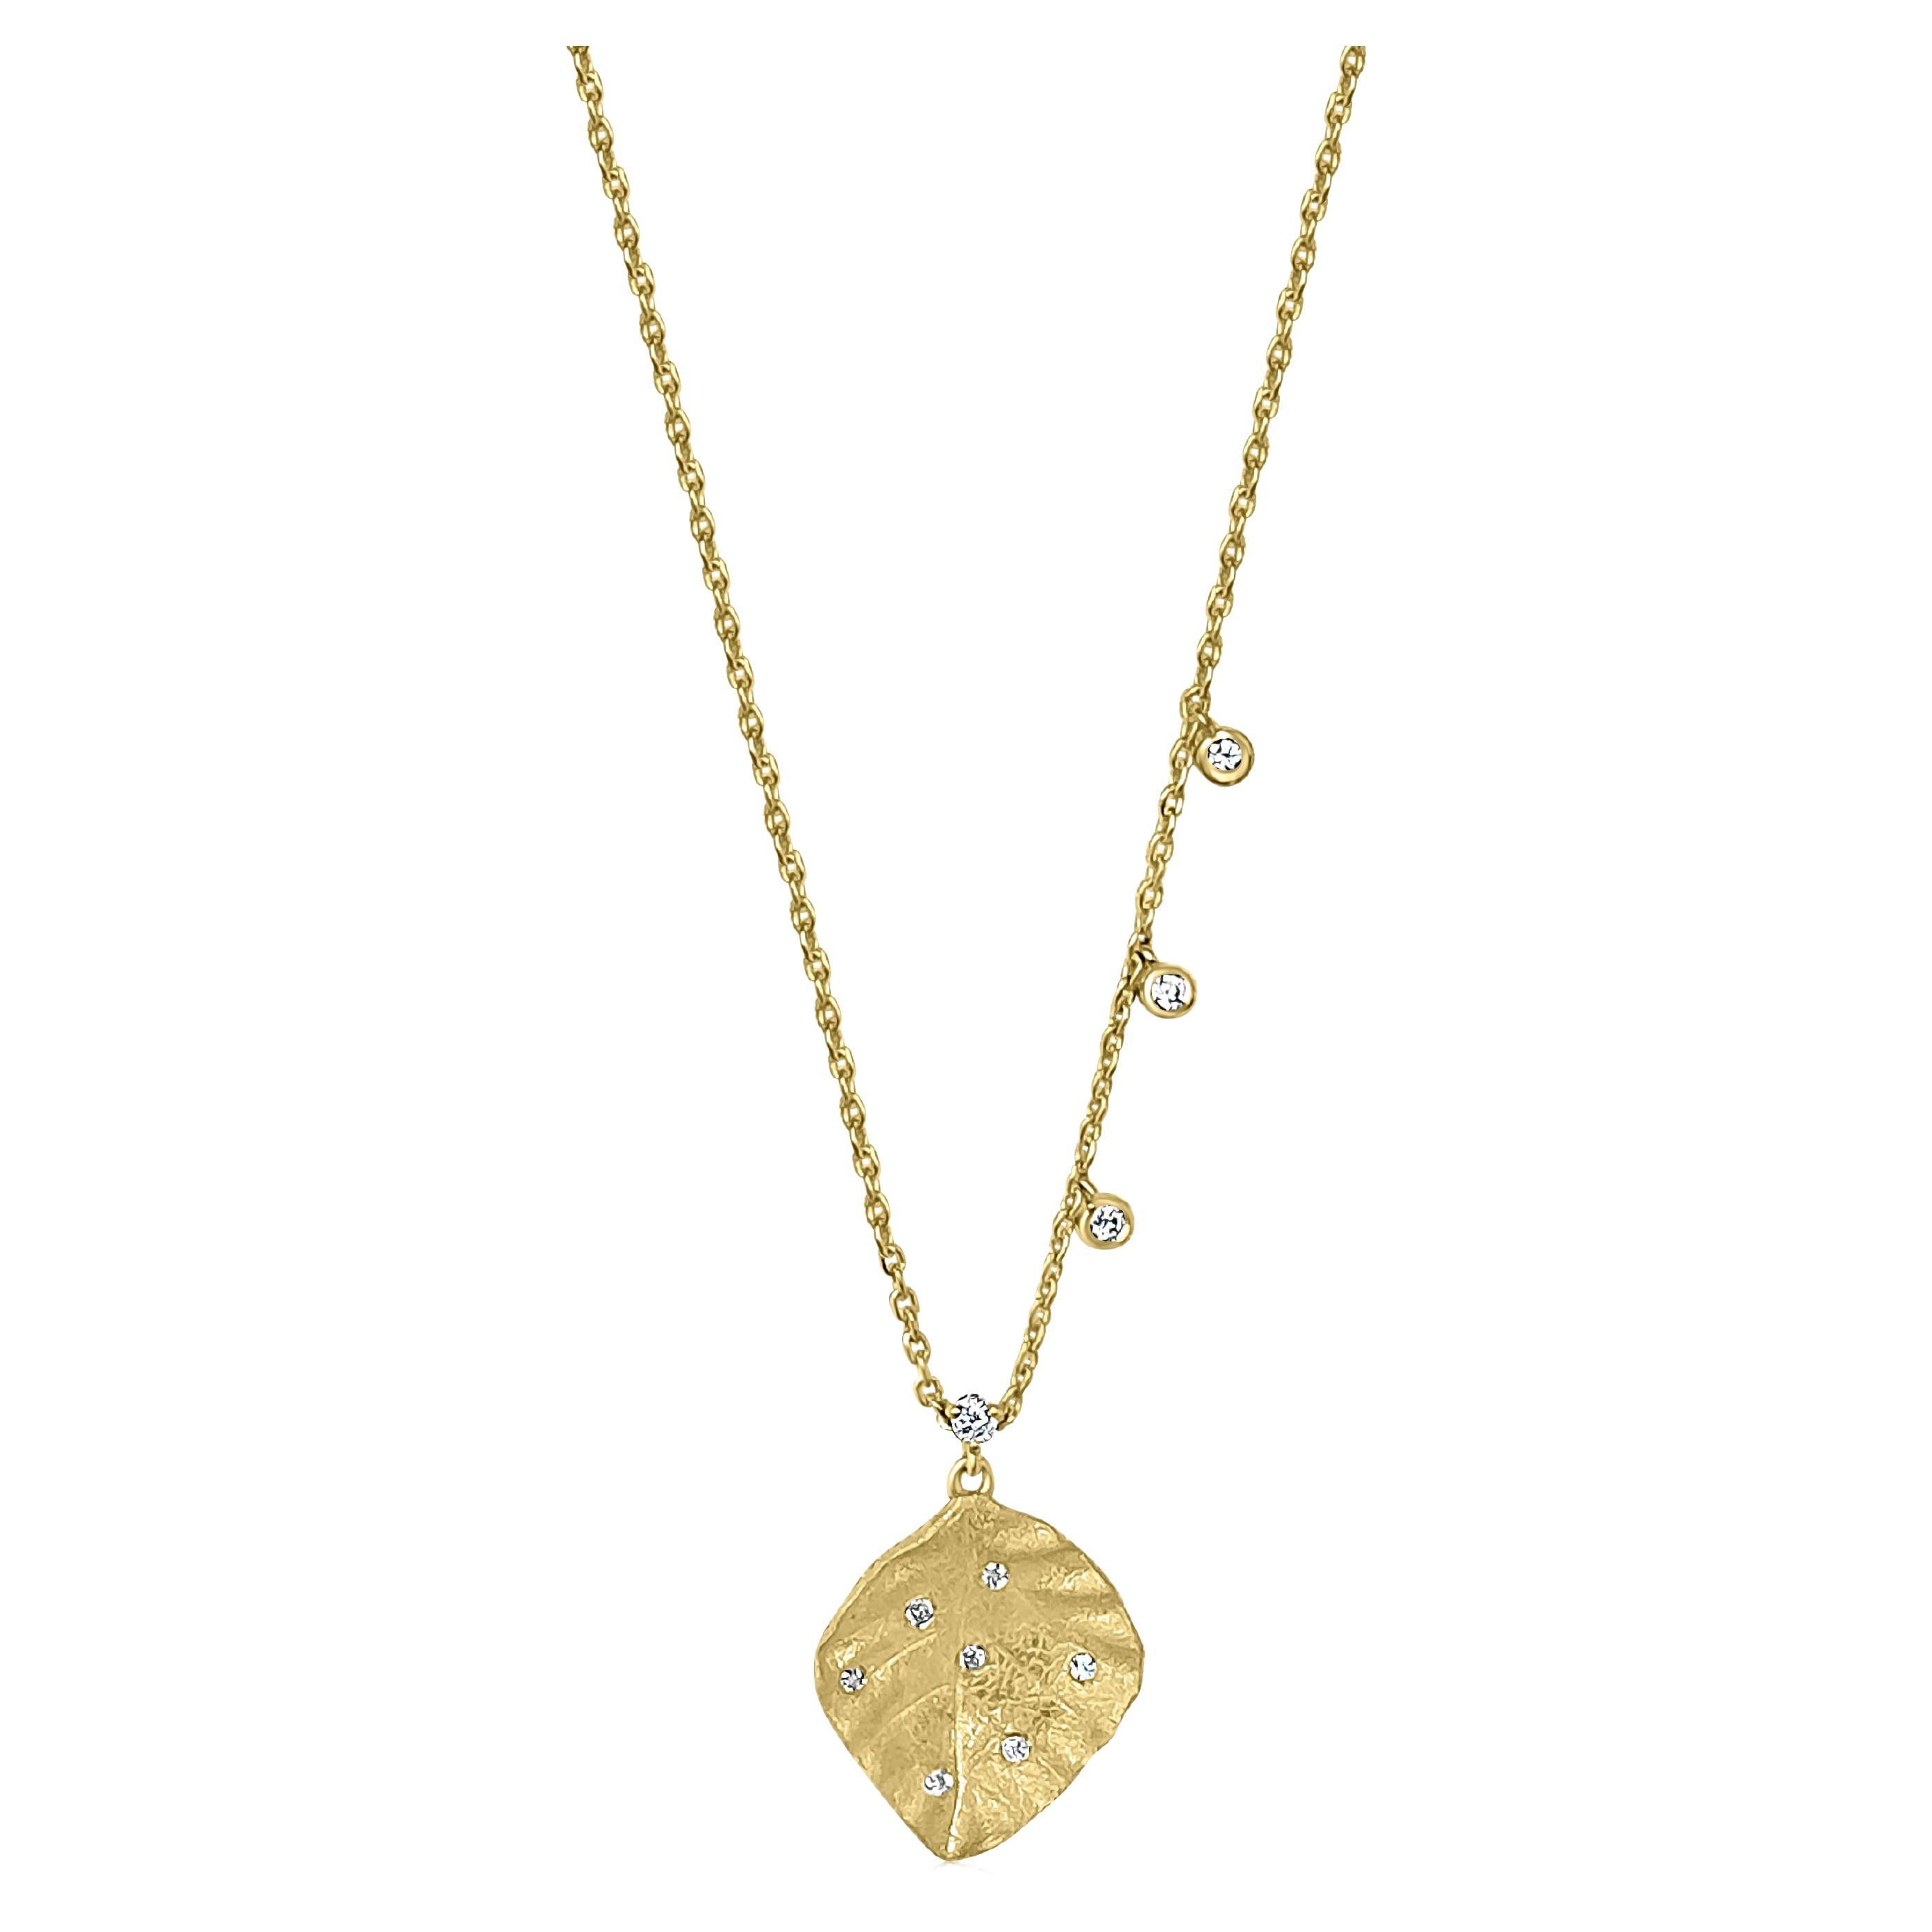 Scattered Diamonds Leaf Necklace with Three Asymmetrical Diamond Charms For Sale